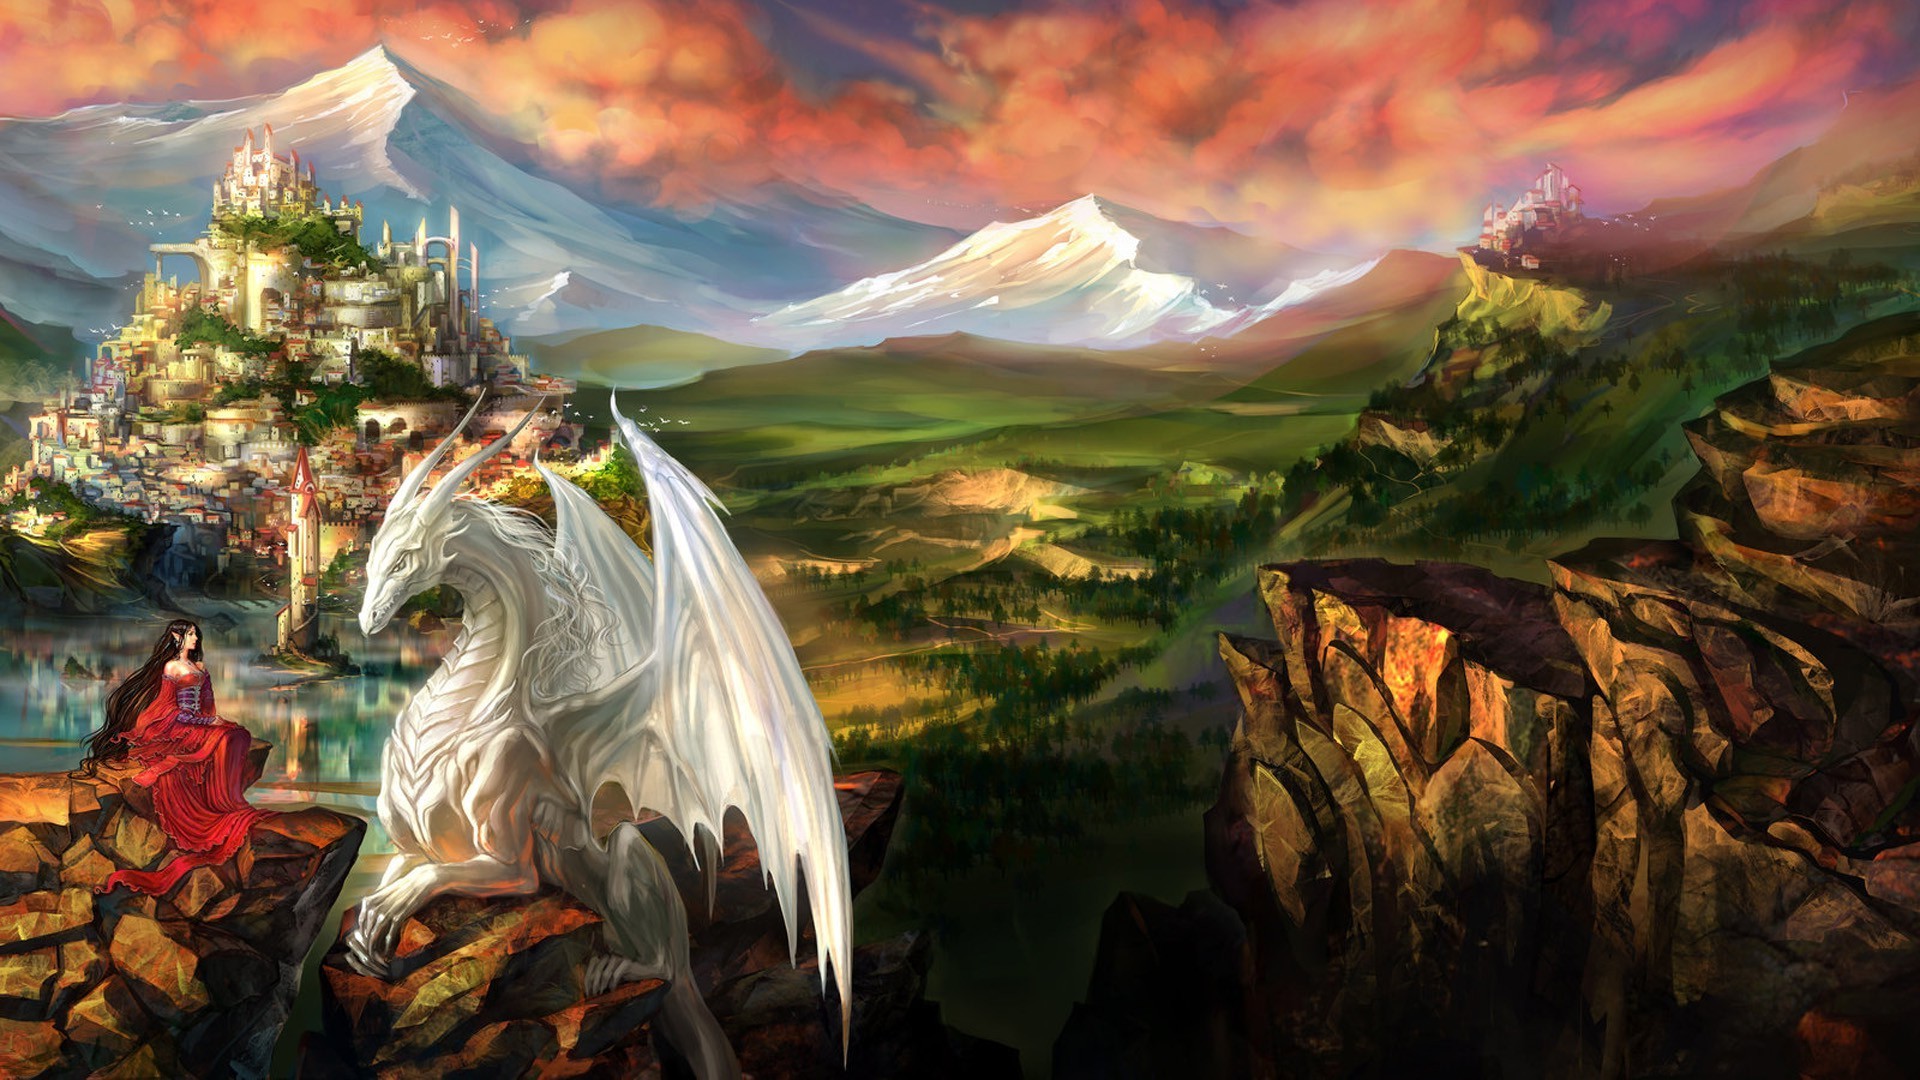 Princess,dragon,castle,mountains - Android wallpapers